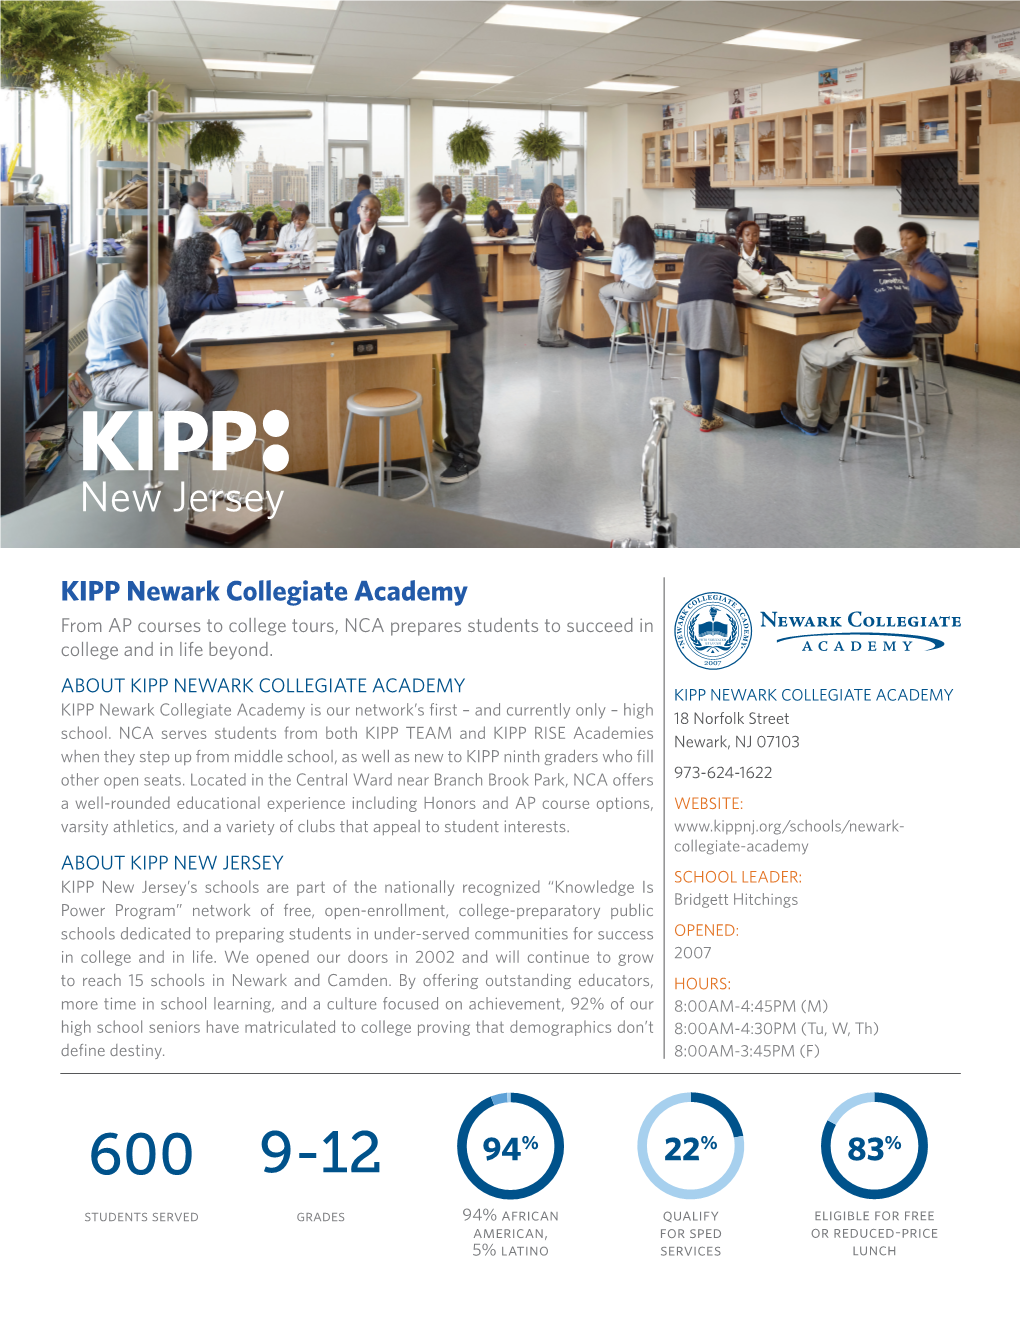 KIPP Newark Collegiate Academy from AP Courses to College Tours, NCA Prepares Students to Succeed in College and in Life Beyond